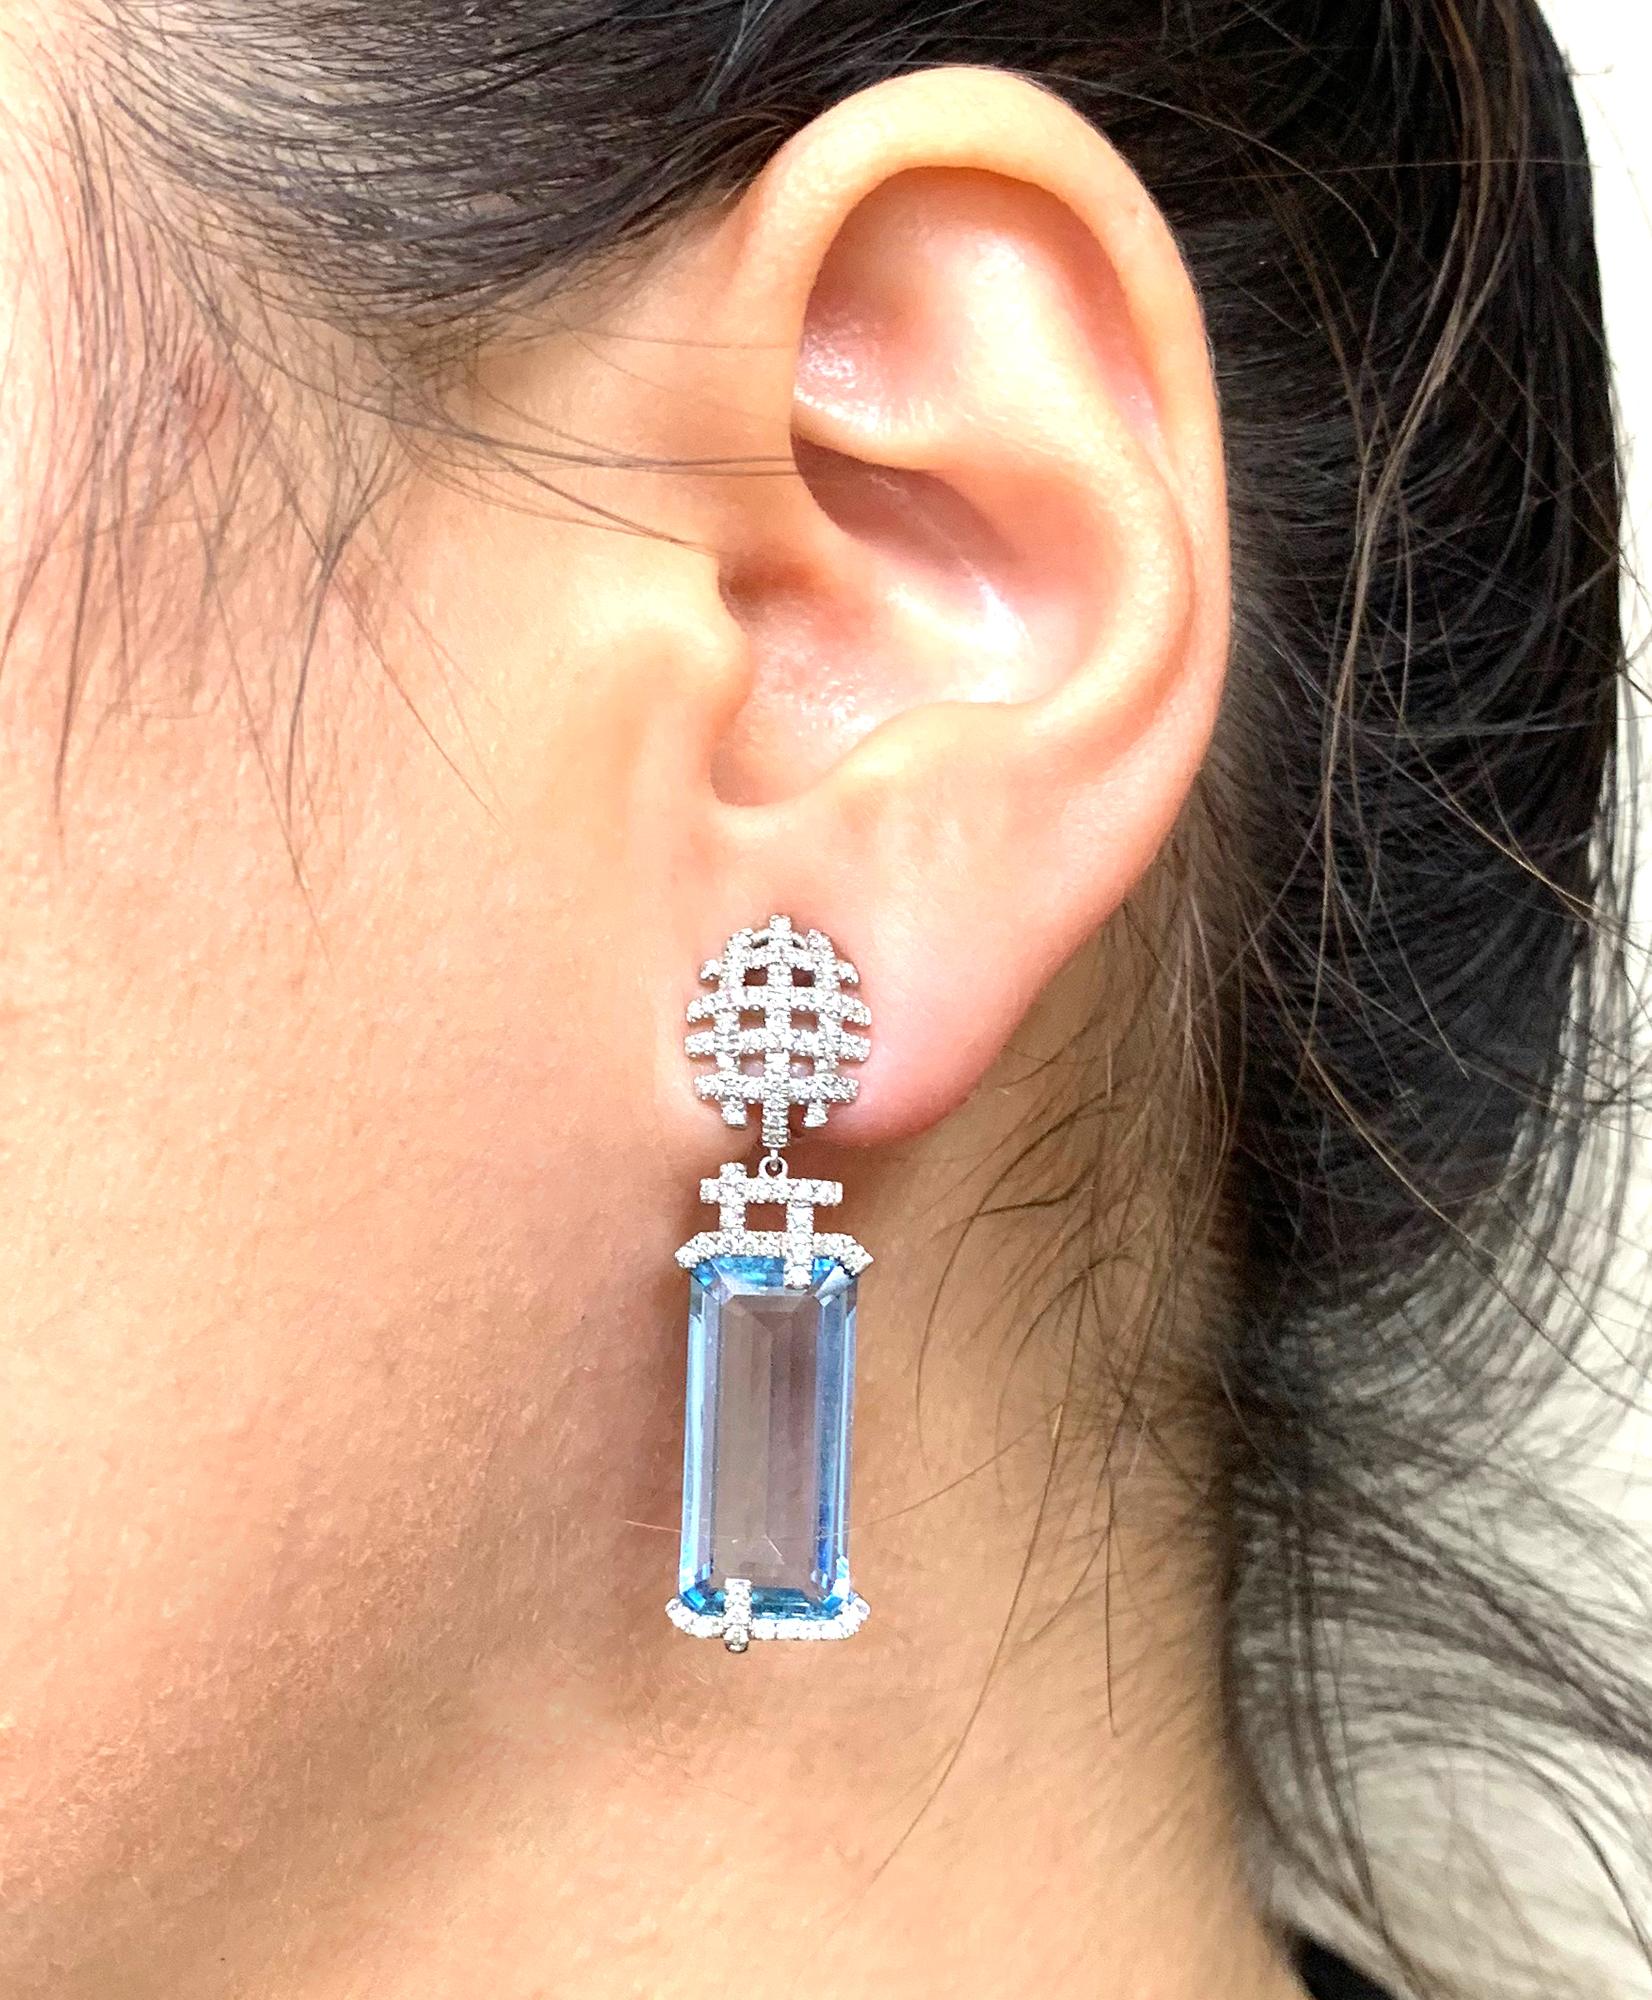 Aquamarine Emerald Cut with Diamond Set Pave Earrings in 18K White Gold, from 'G-One' Collection

Stone Size: 18.7 x 8.8 mm

Approx. Wt: 11.70 Carats (Aquamarine) 

Diamonds: G-H / VS, Approx Wt: 0.49 Carats 